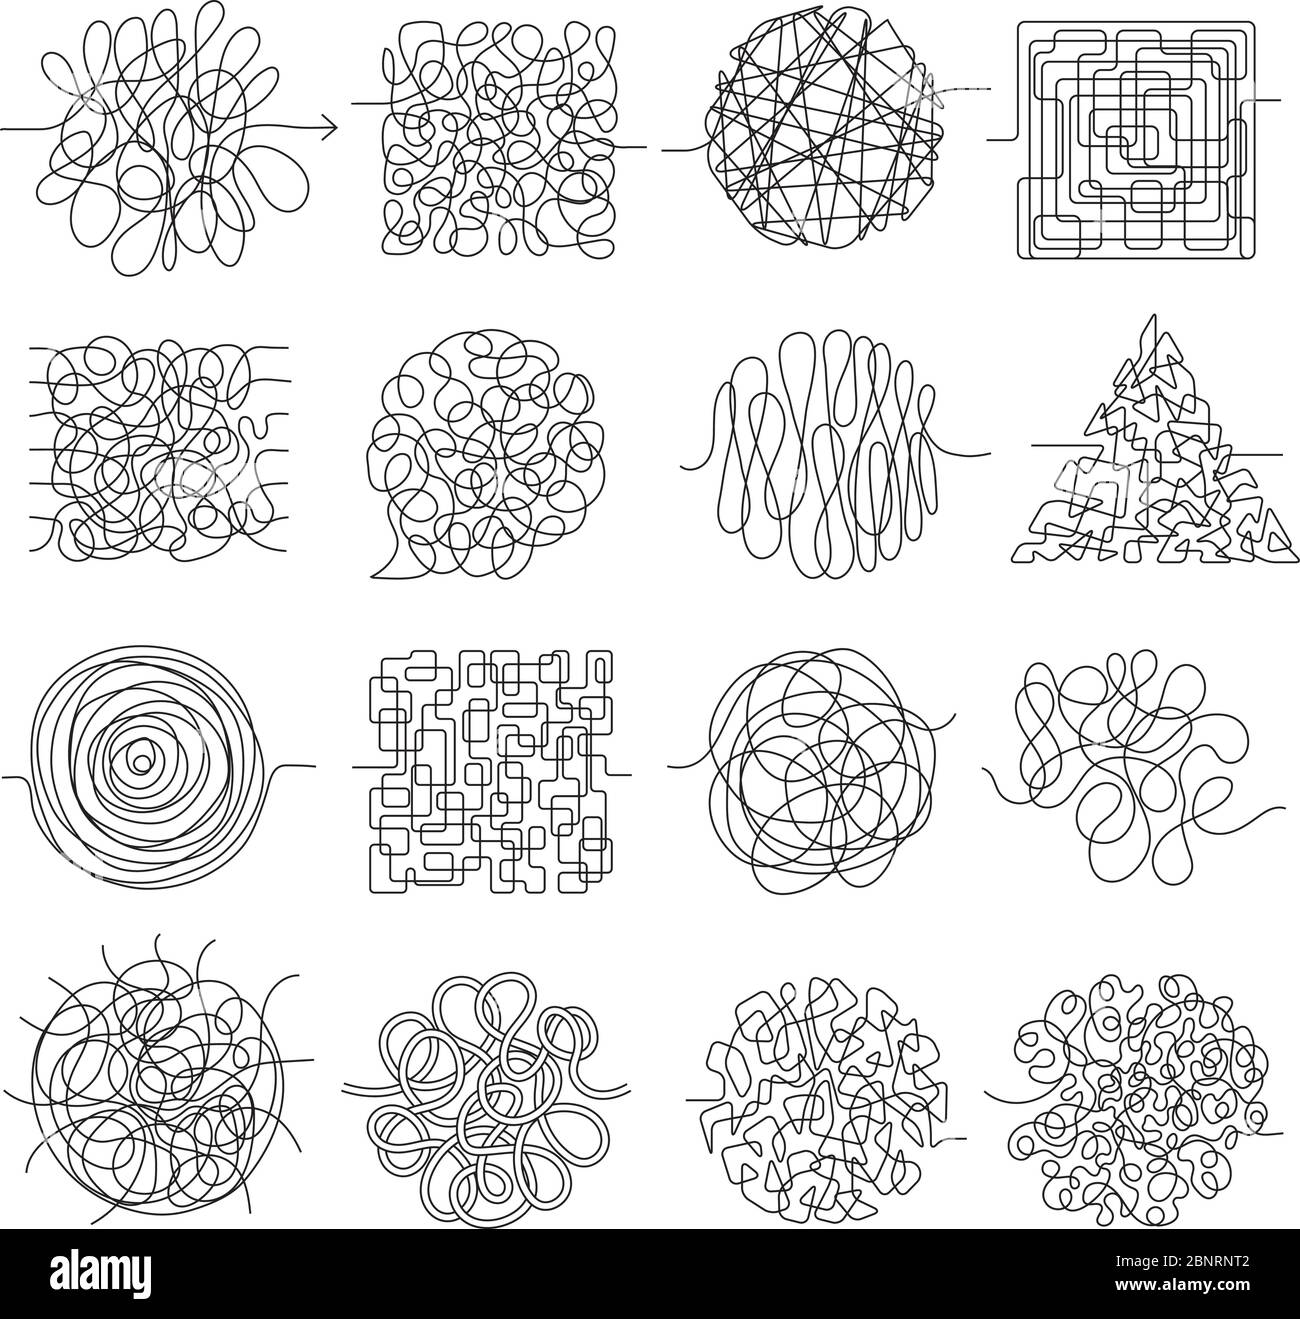 Scribble lines. Wire mess chaos threading vector shapes isolated Stock Vector